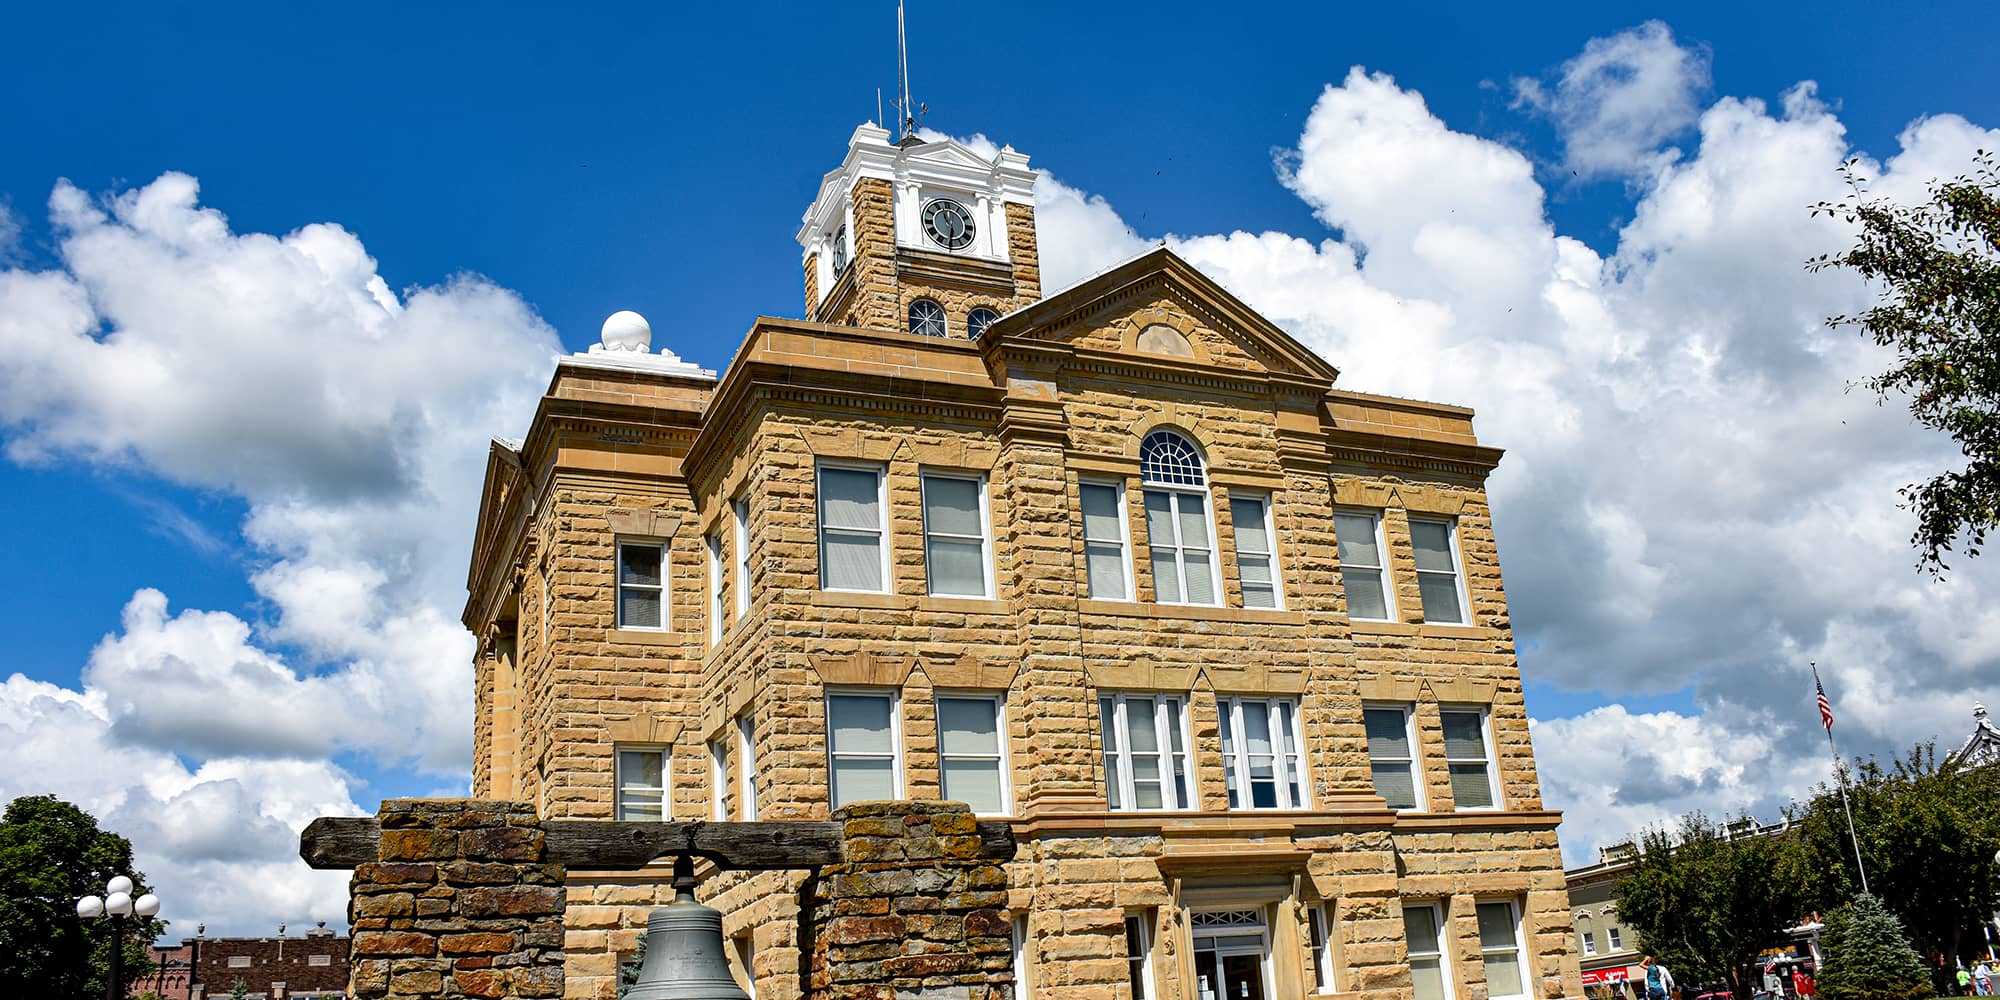 Image of Monroe County Auditor Monroe County Courthouse